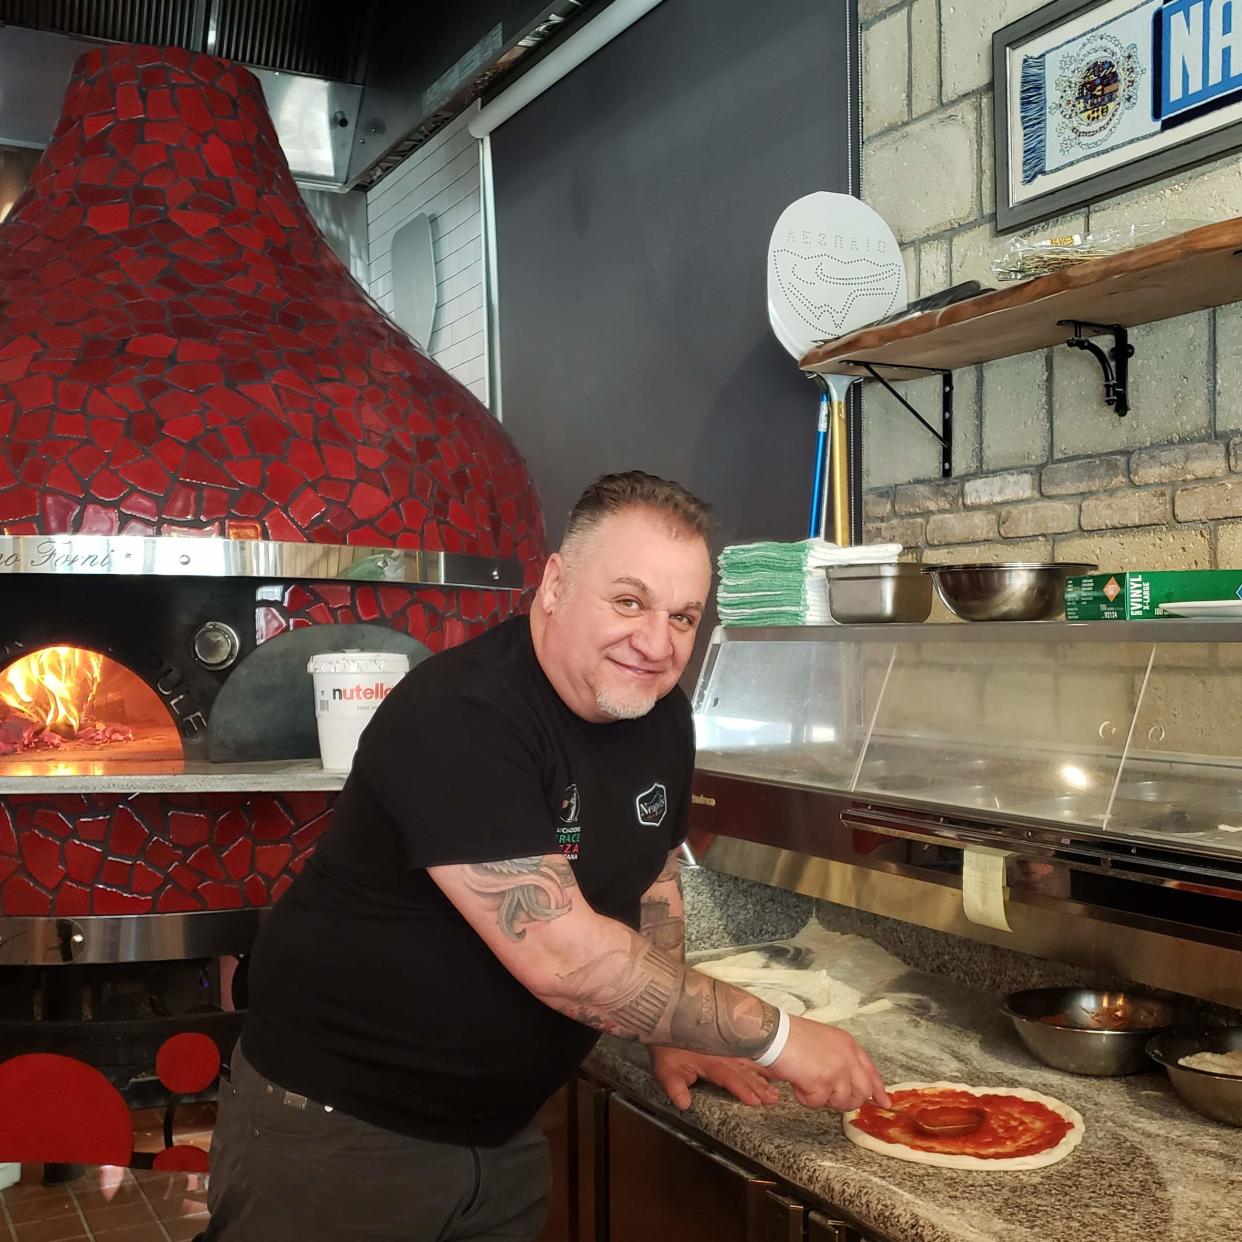 Chef Pasquale making a pizza at his South Kingstown restaurant that is No. 12 on the list of the 50 best pizzerias in the United State.